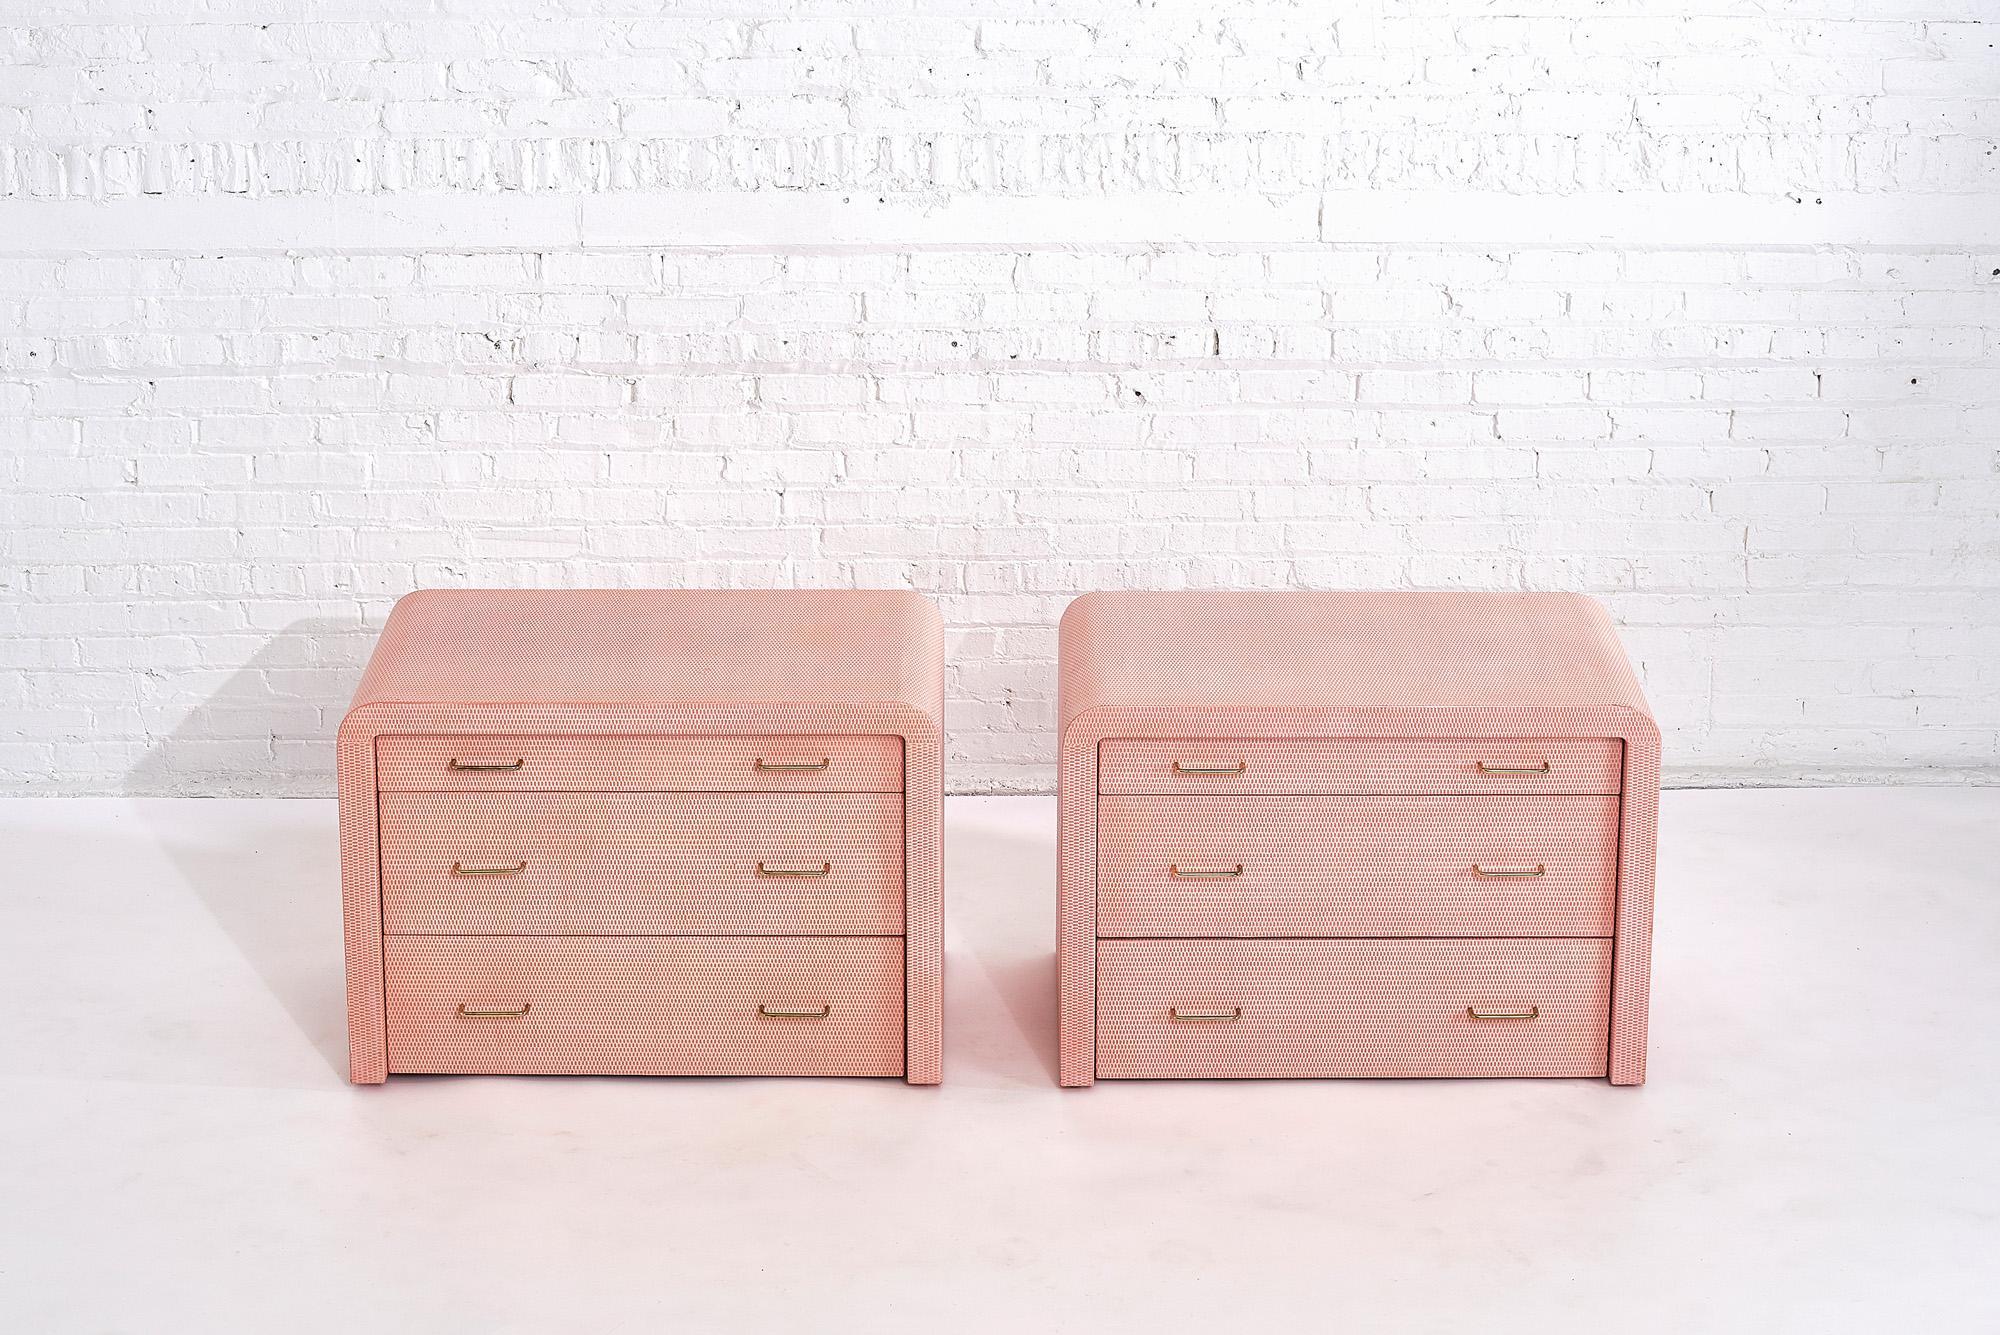 Karl Springer pink lacquered grass cloth pair dressers, nightstands with brass hardware, circa 1970s.